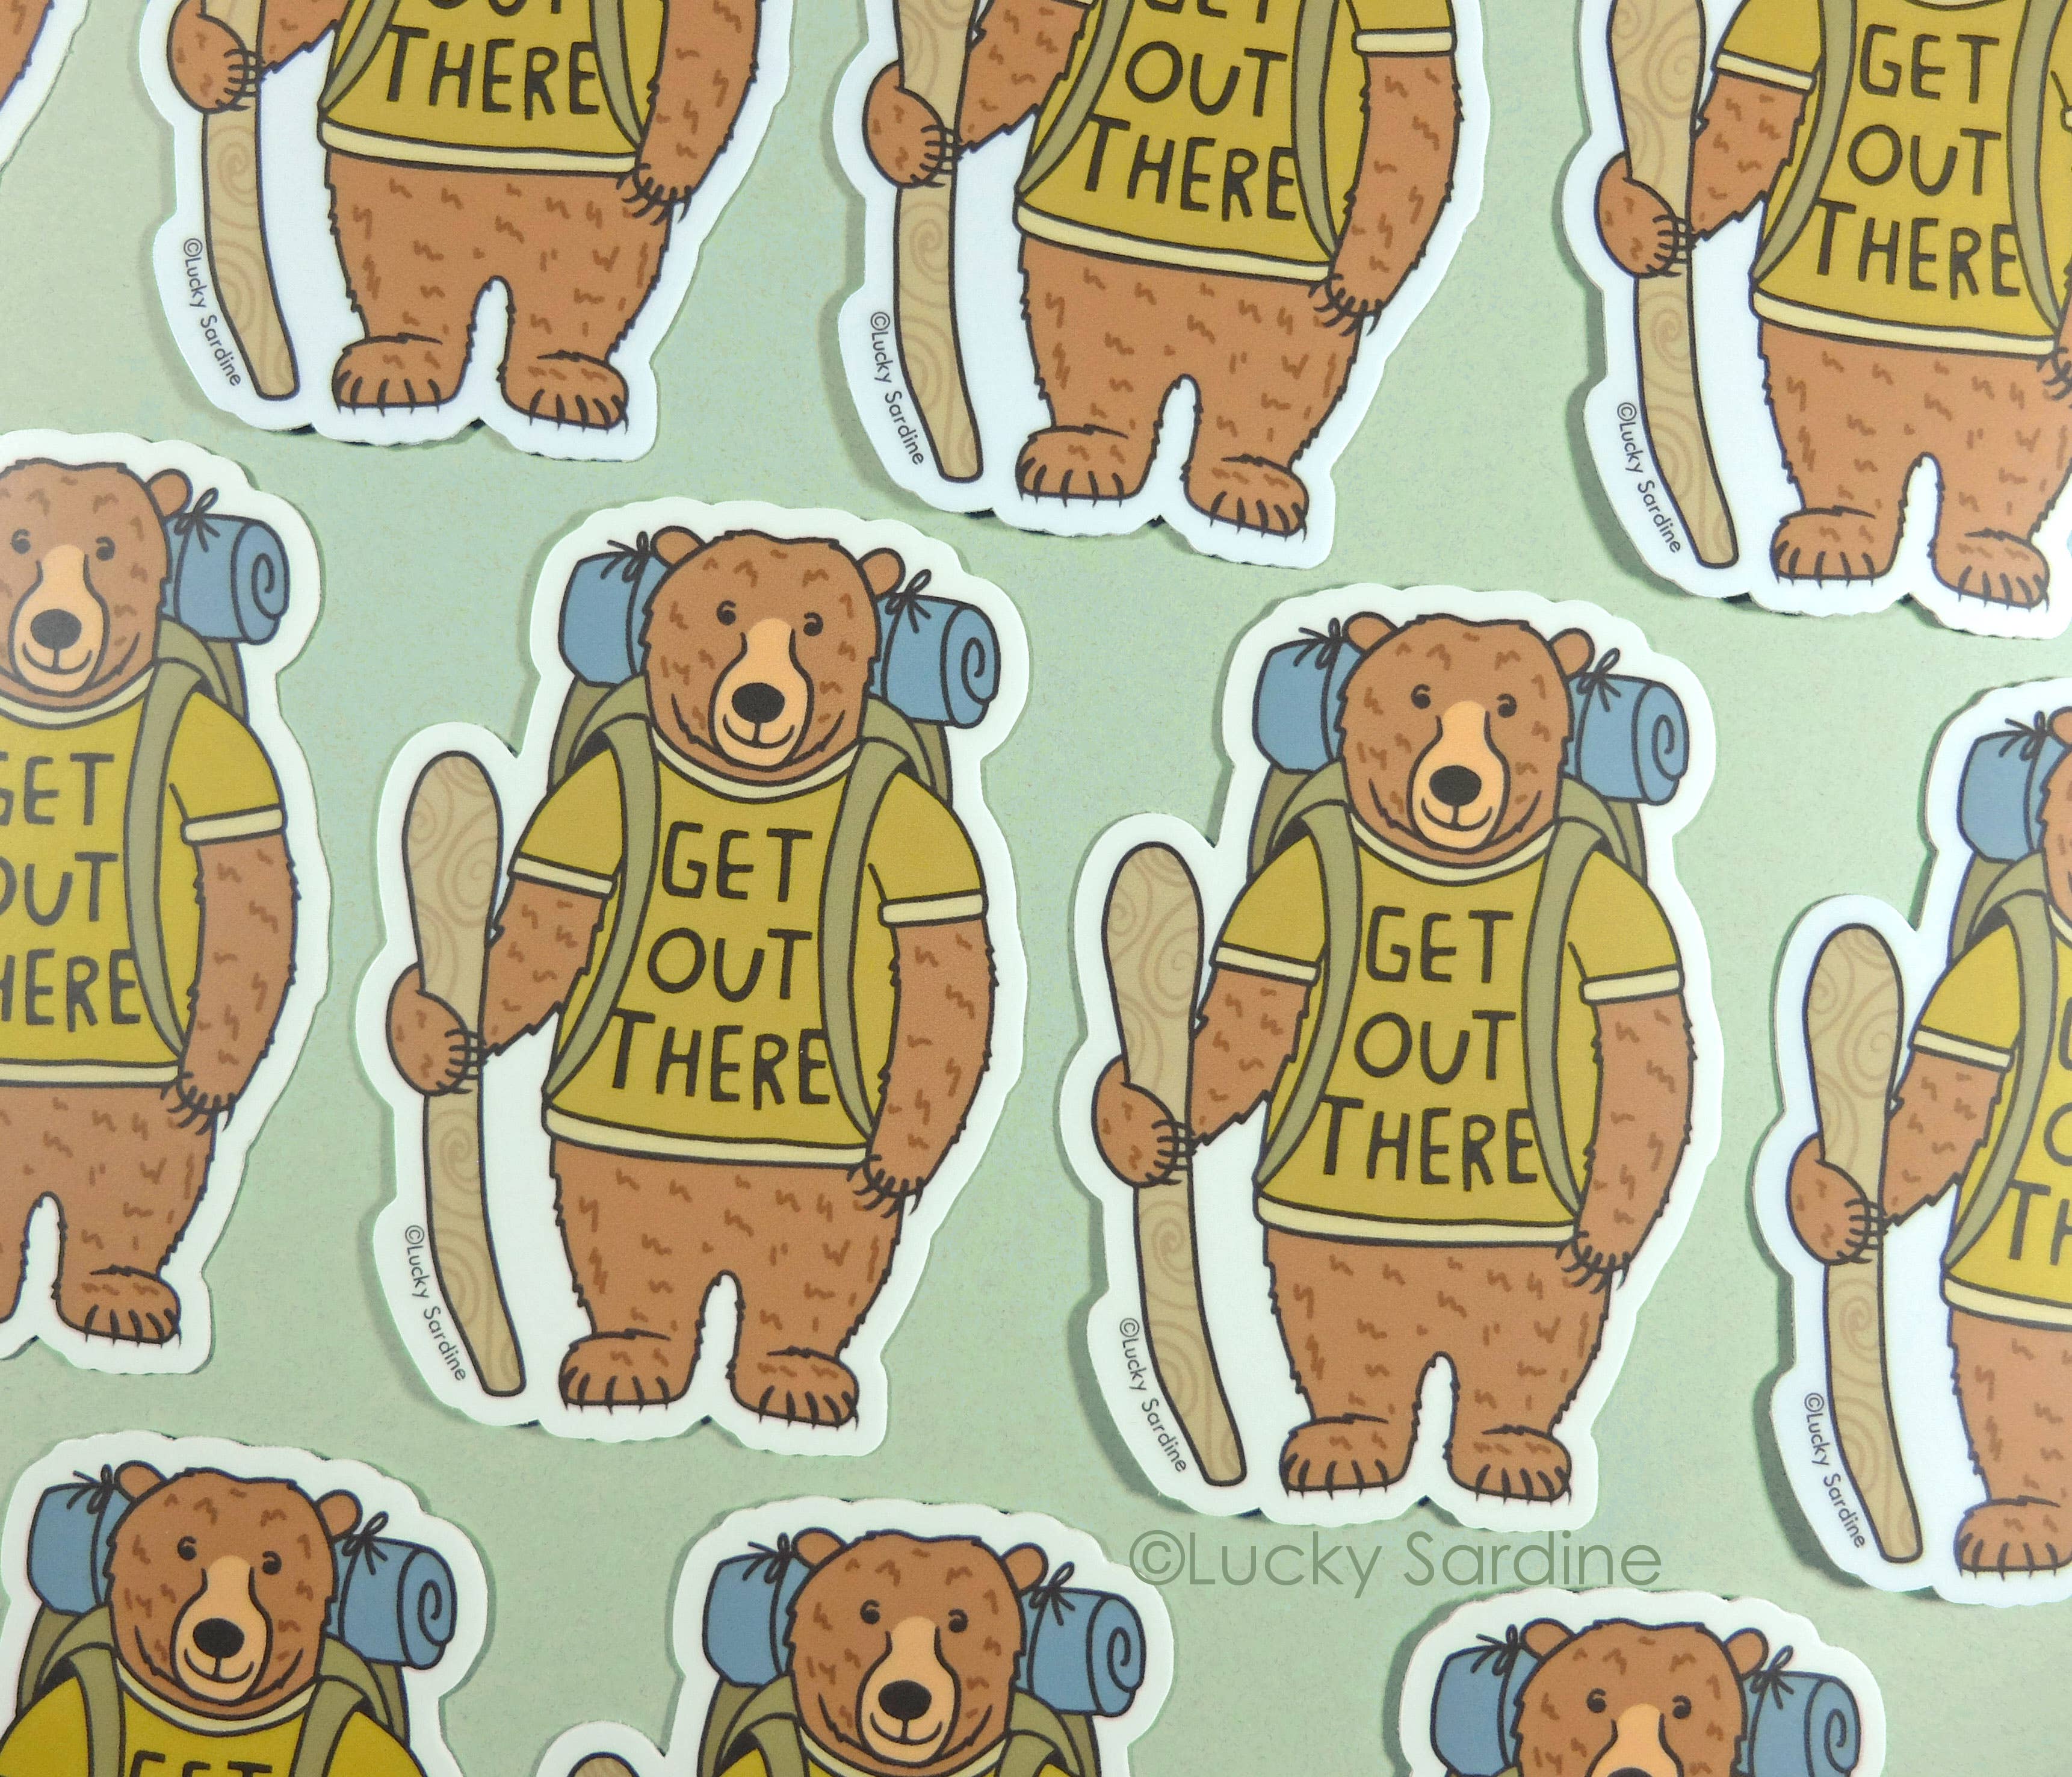 Get Out There Vinyl Sticker